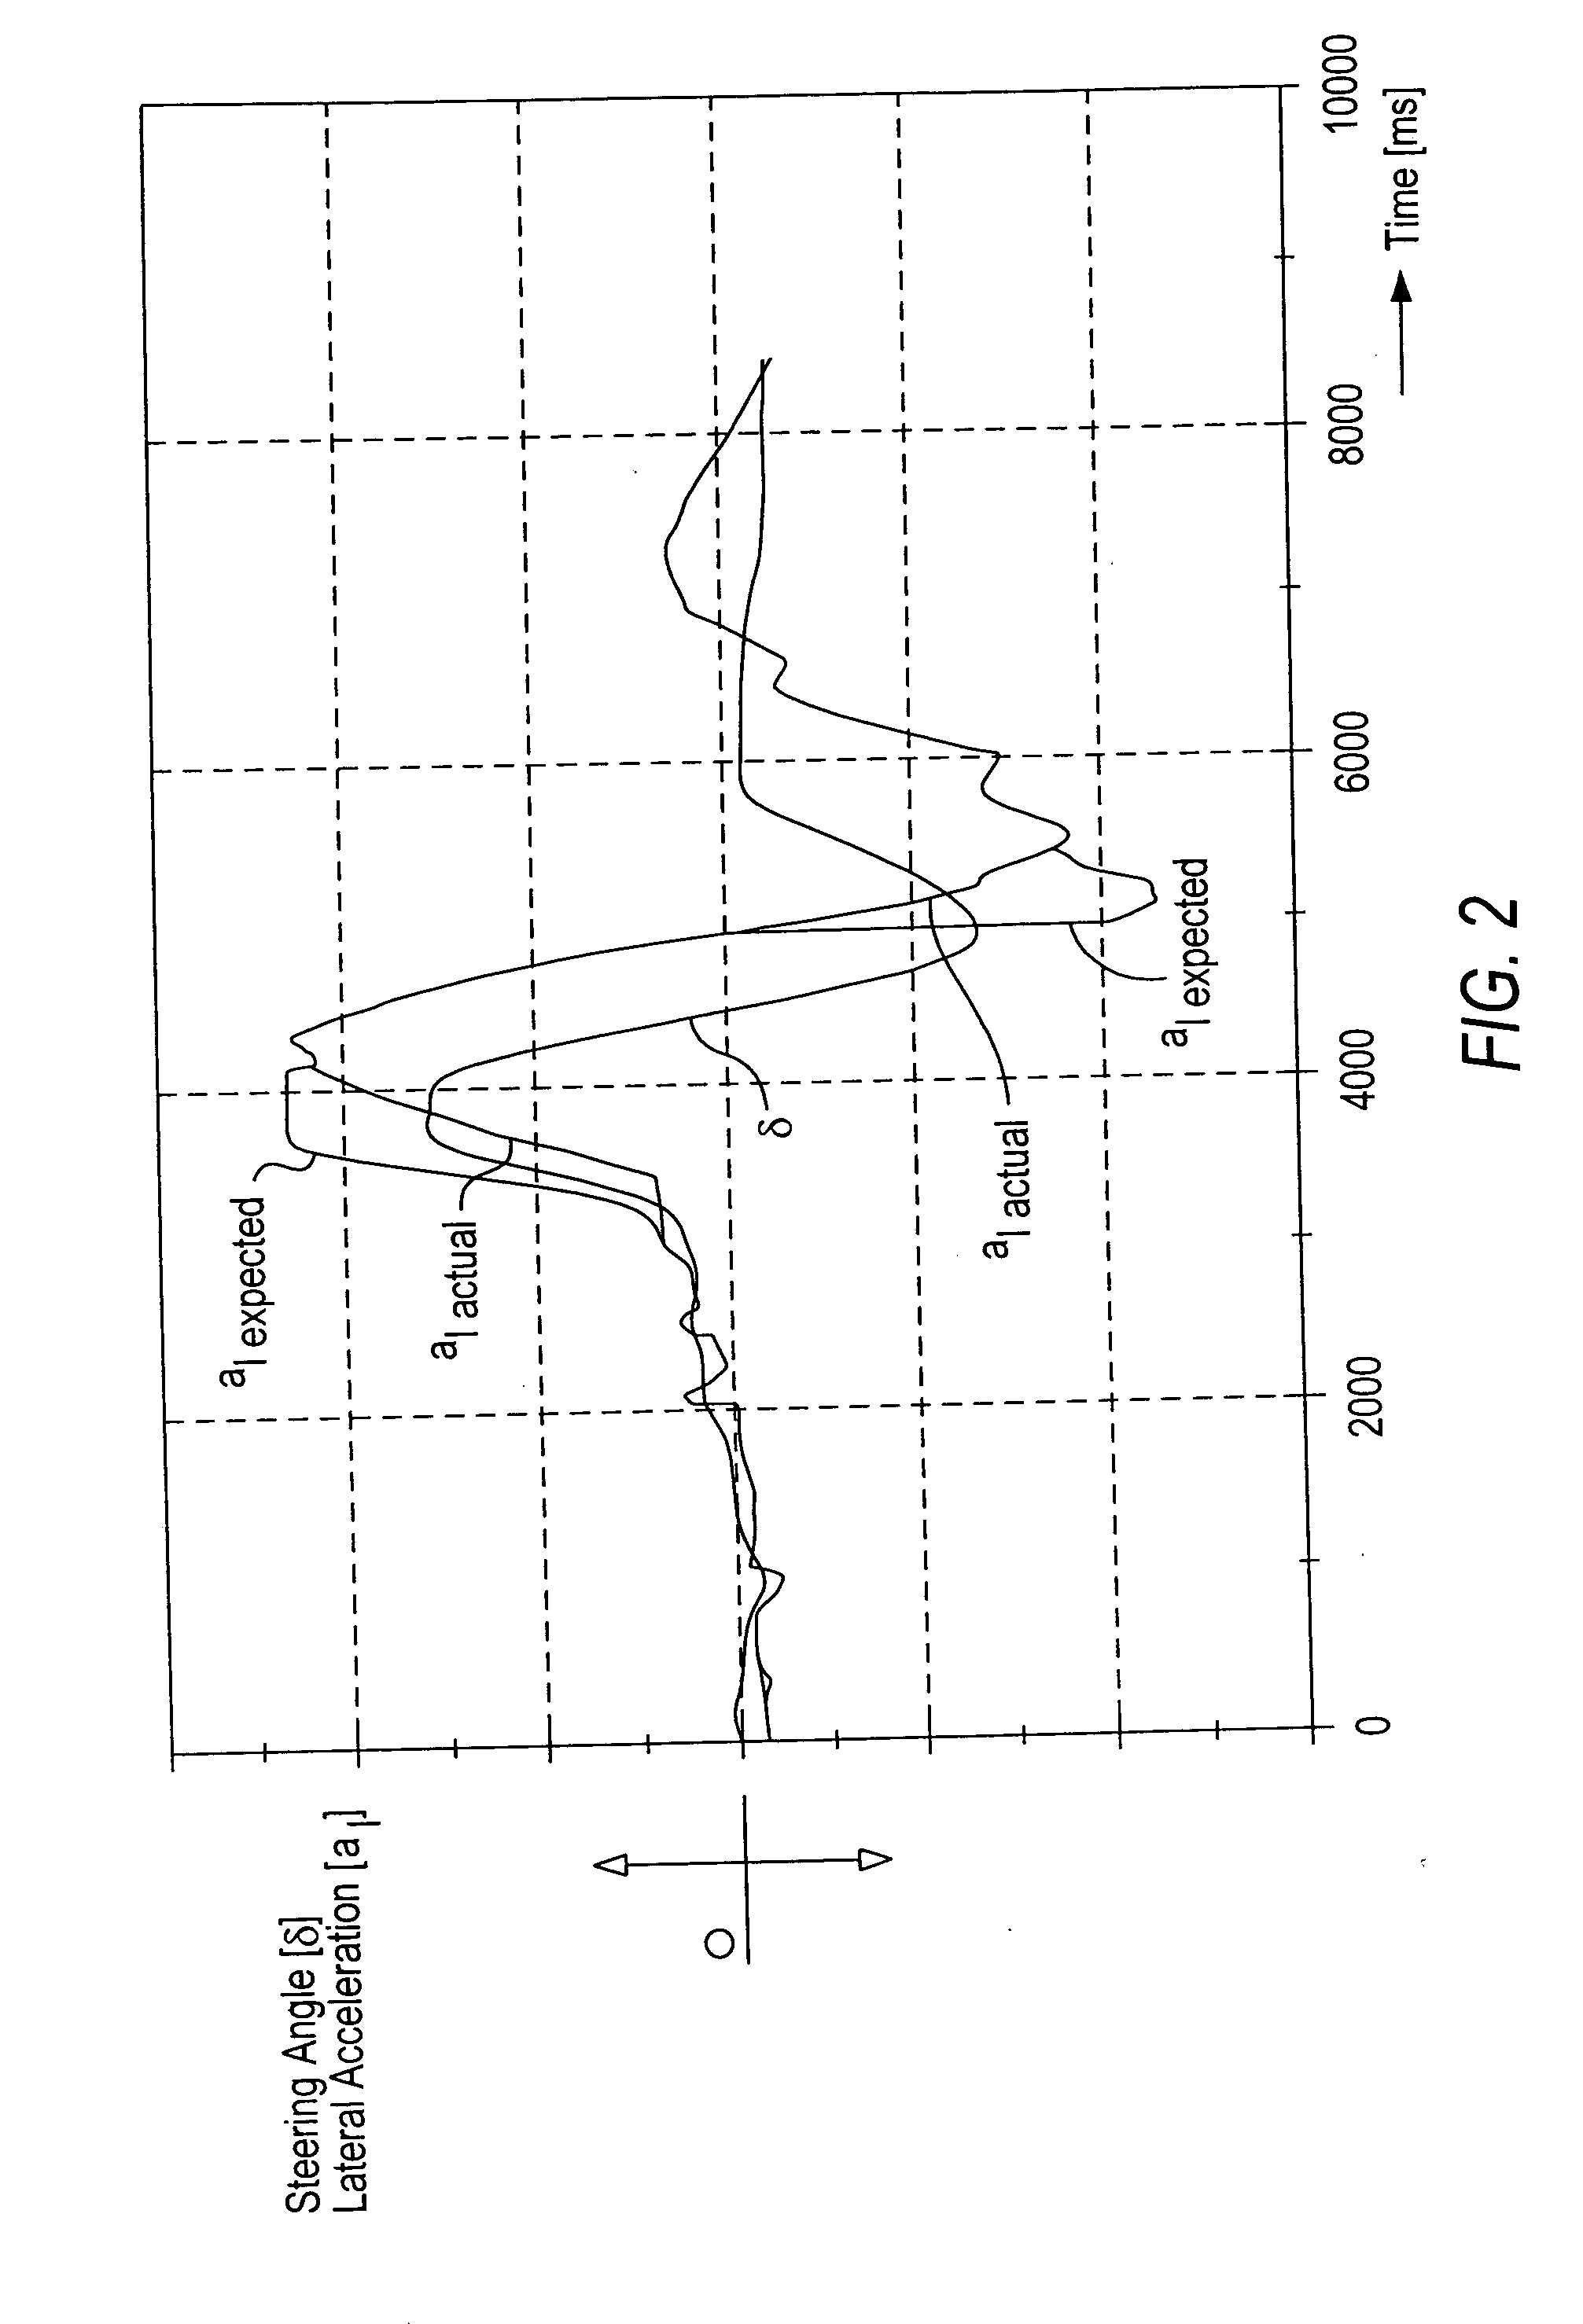 Method and system for predicting lateral acceleration of a vehicle